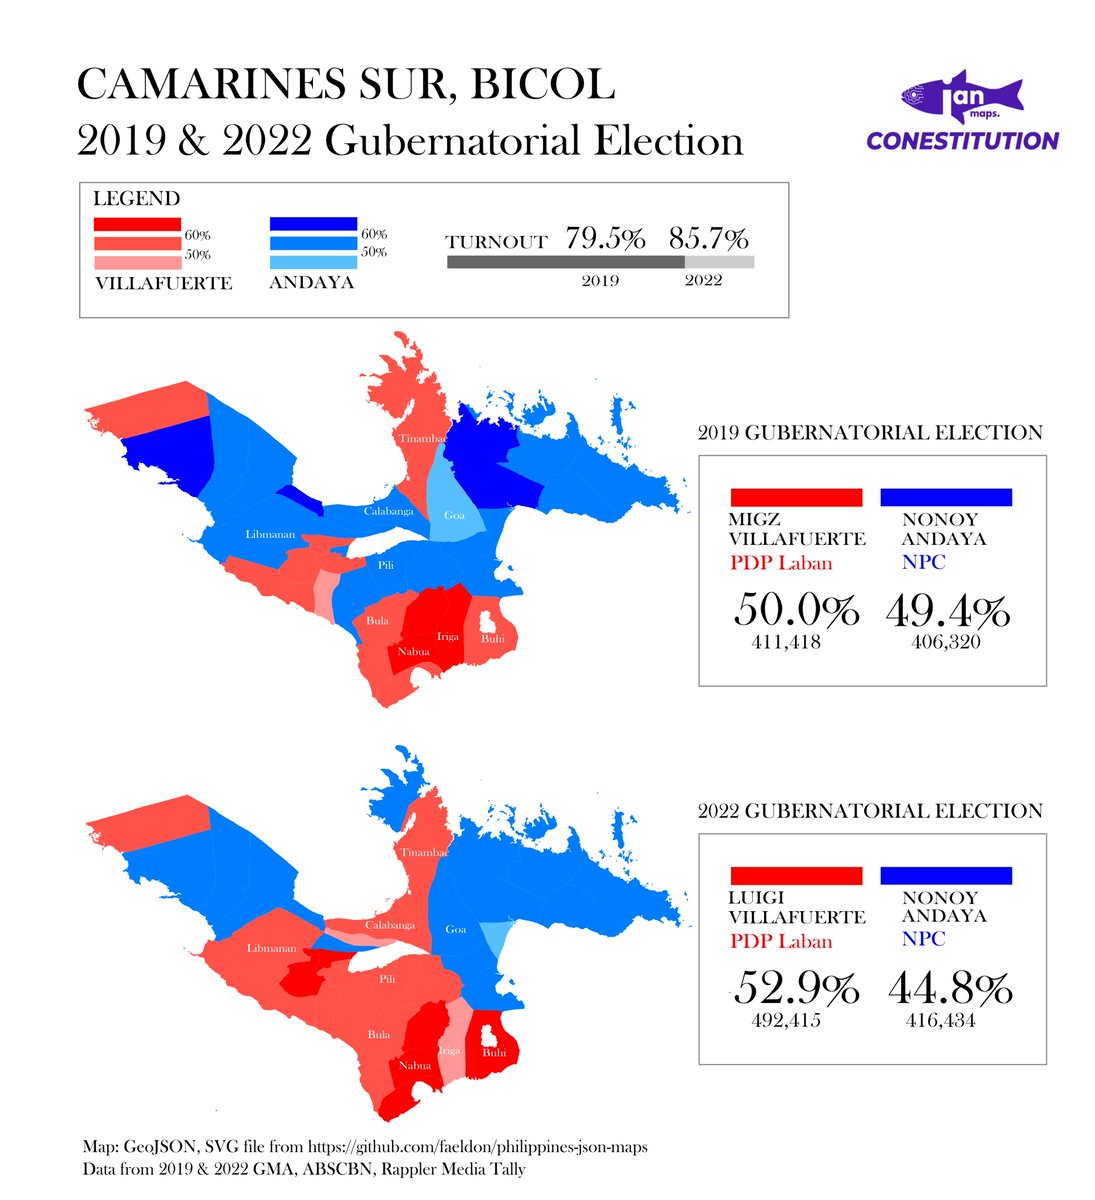 Camarines Sur 2019-22 Gov Elections

2019: Gov. Migz Villafuerte won re-election by 0.6% or just 5,000 votes against Rep. Andaya

2022: Gov. Migz' brother Luigi Villafuerte took the Governorship, expanding the lead to 8% against Andaya

@agodadski🗺️
#CamarinesSur
#ElectionTwitter